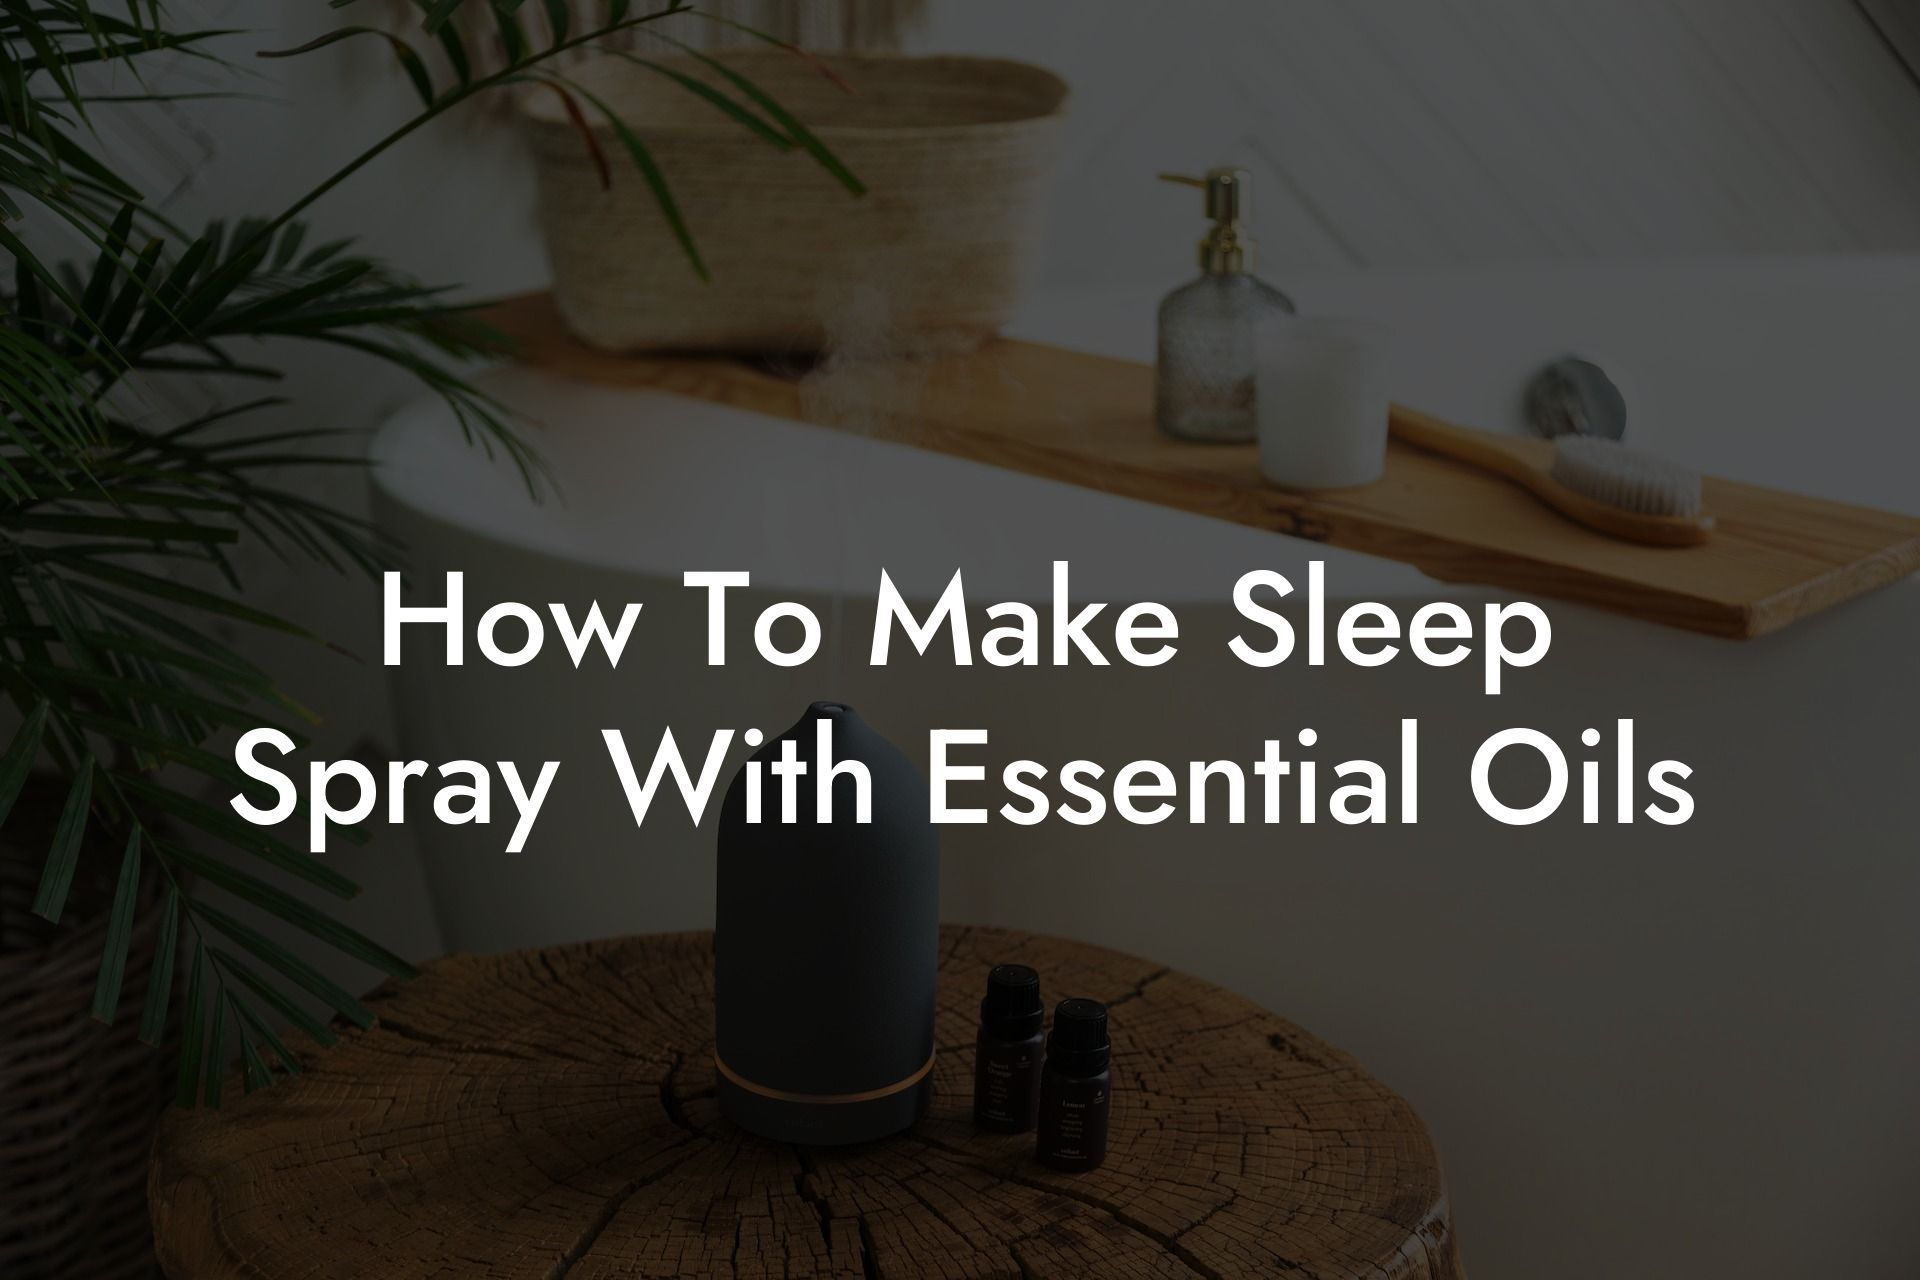 How To Make Sleep Spray With Essential Oils